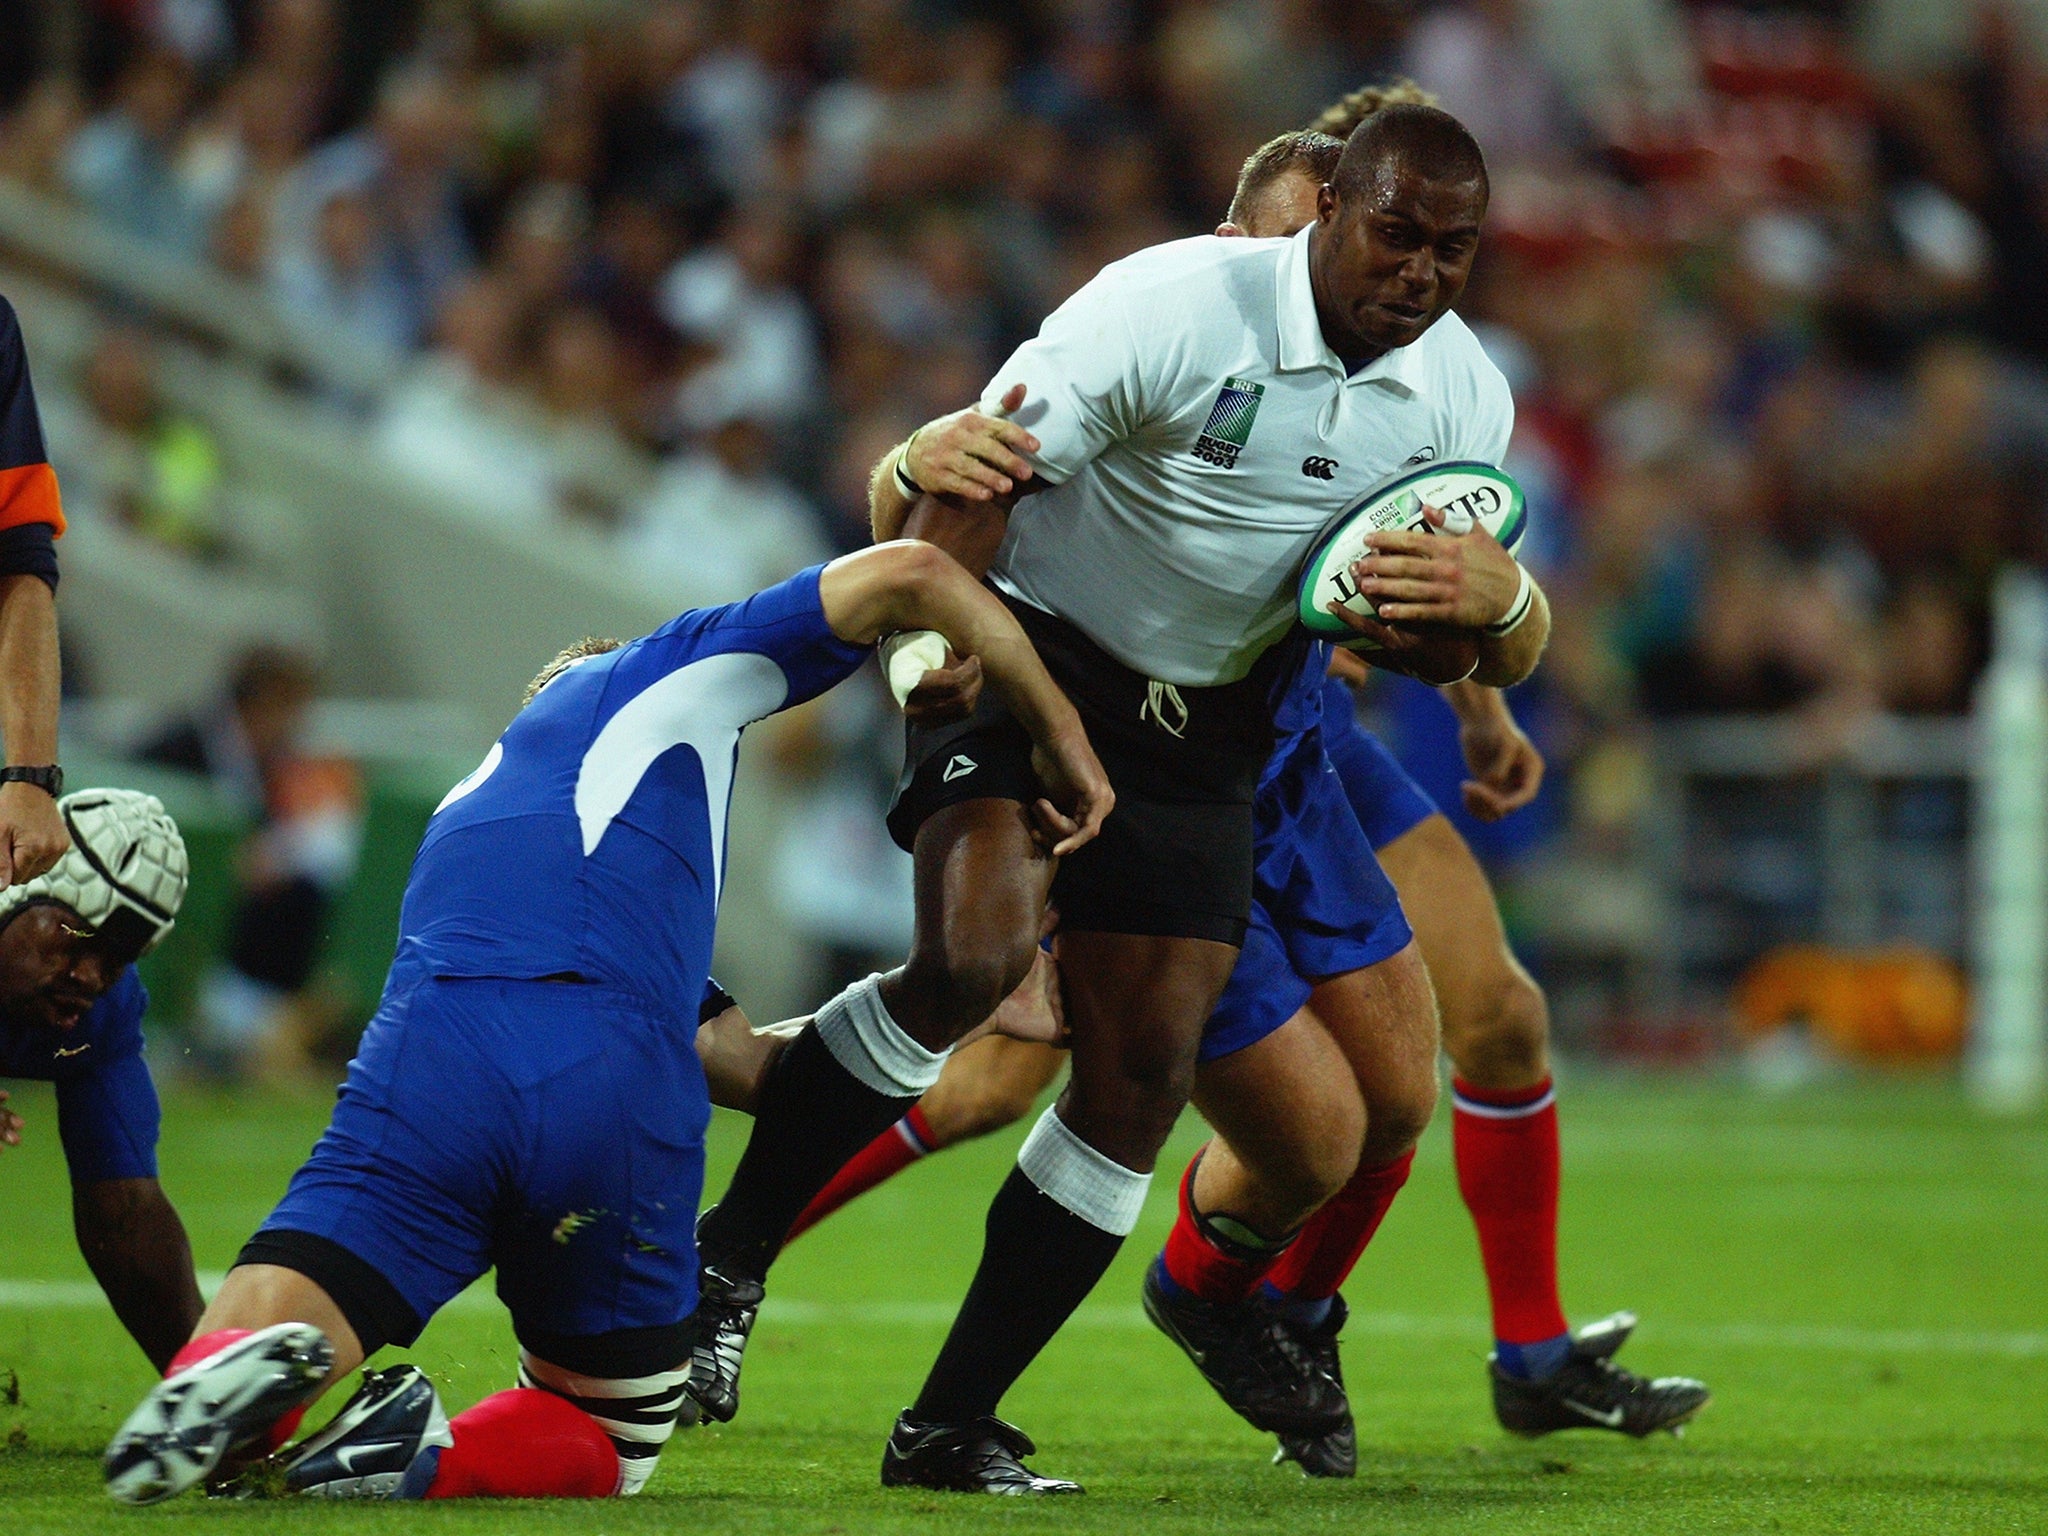 Caucau made his name at the 2003 Rugby World Cup